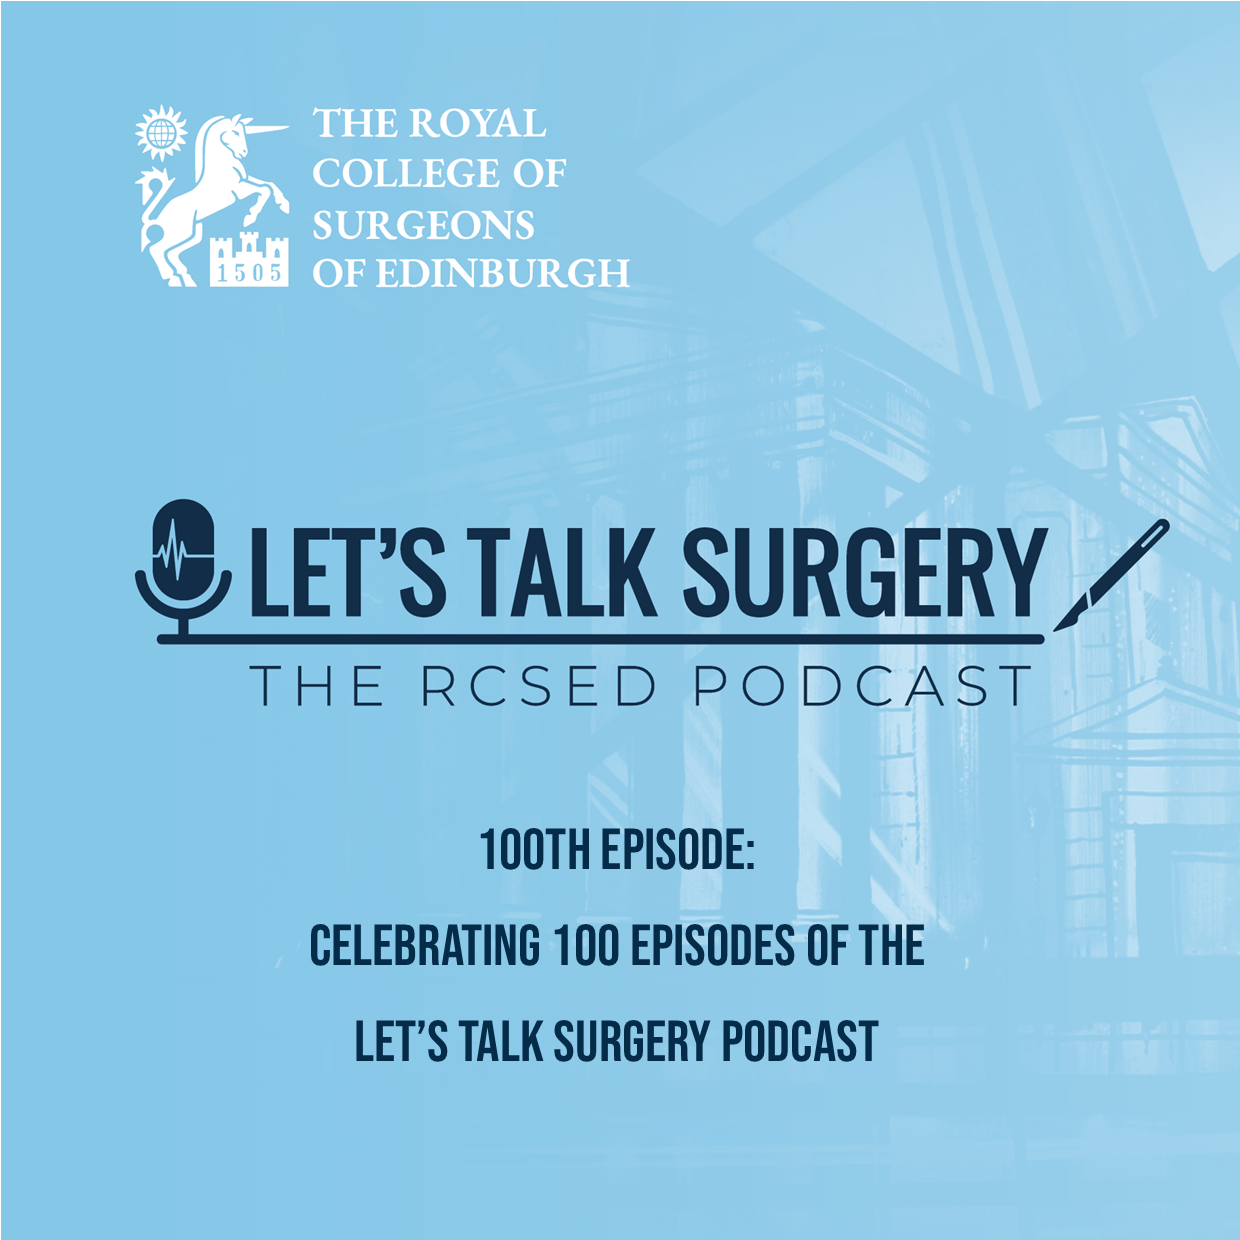 Celebrating 100 episodes of the Let’s Talk Surgery Podcast